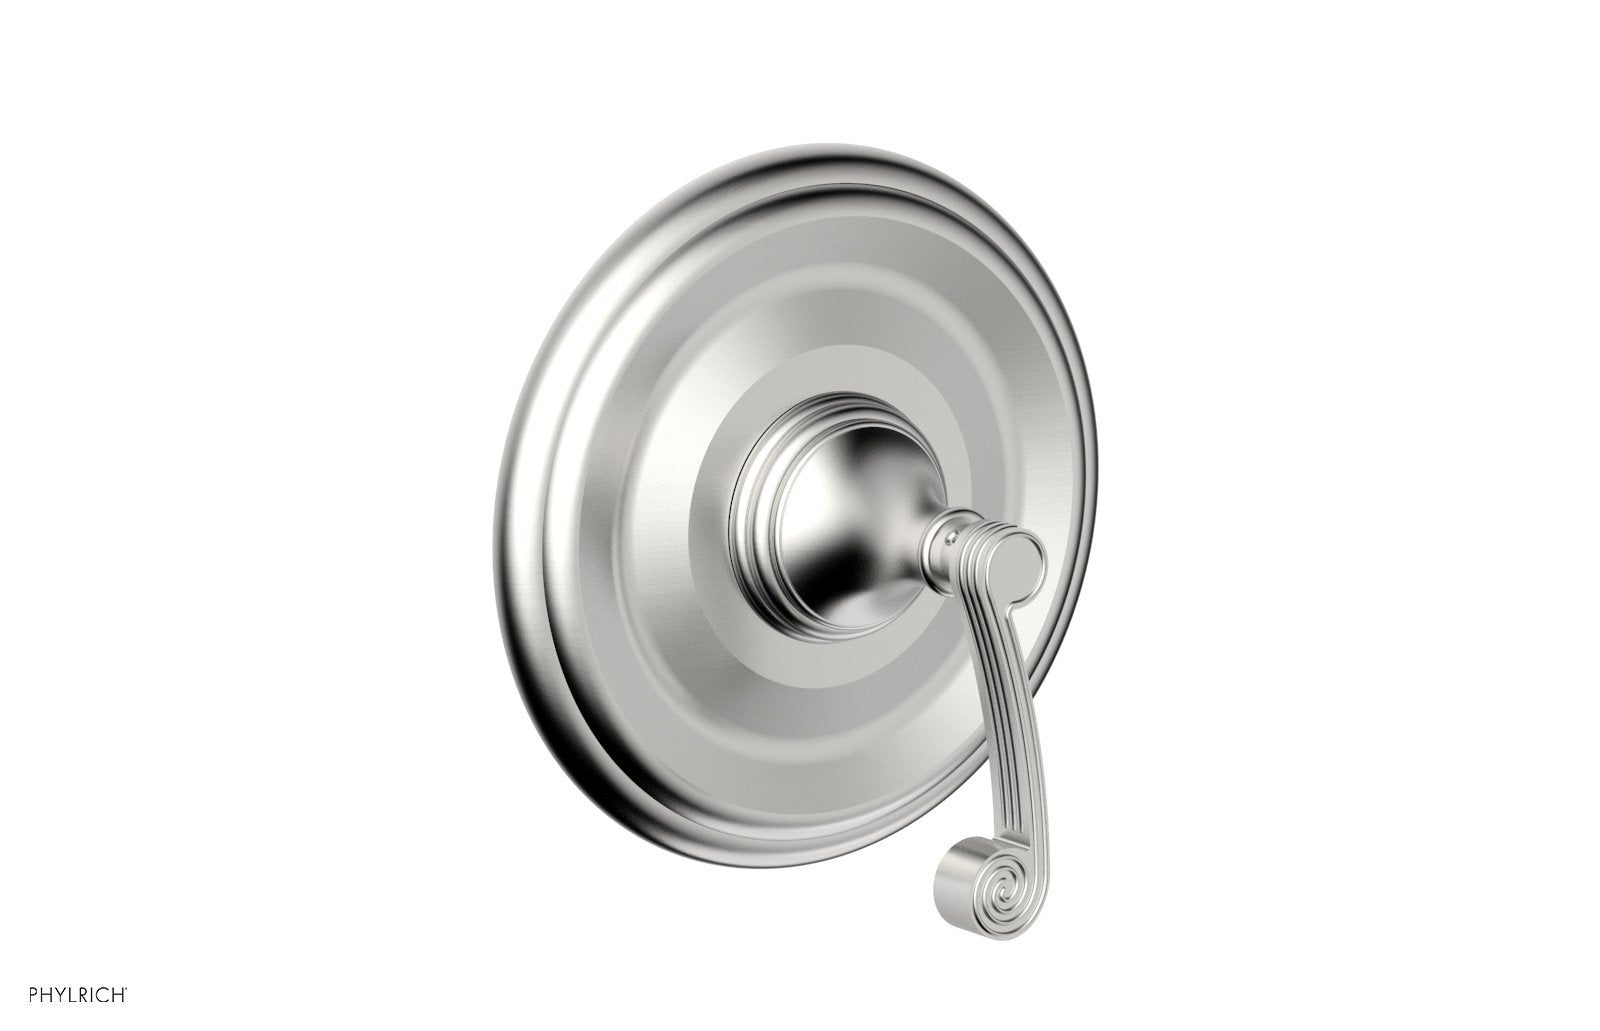 Phylrich 3RING Thermostatic Shower Trim - Curved Lever Handle